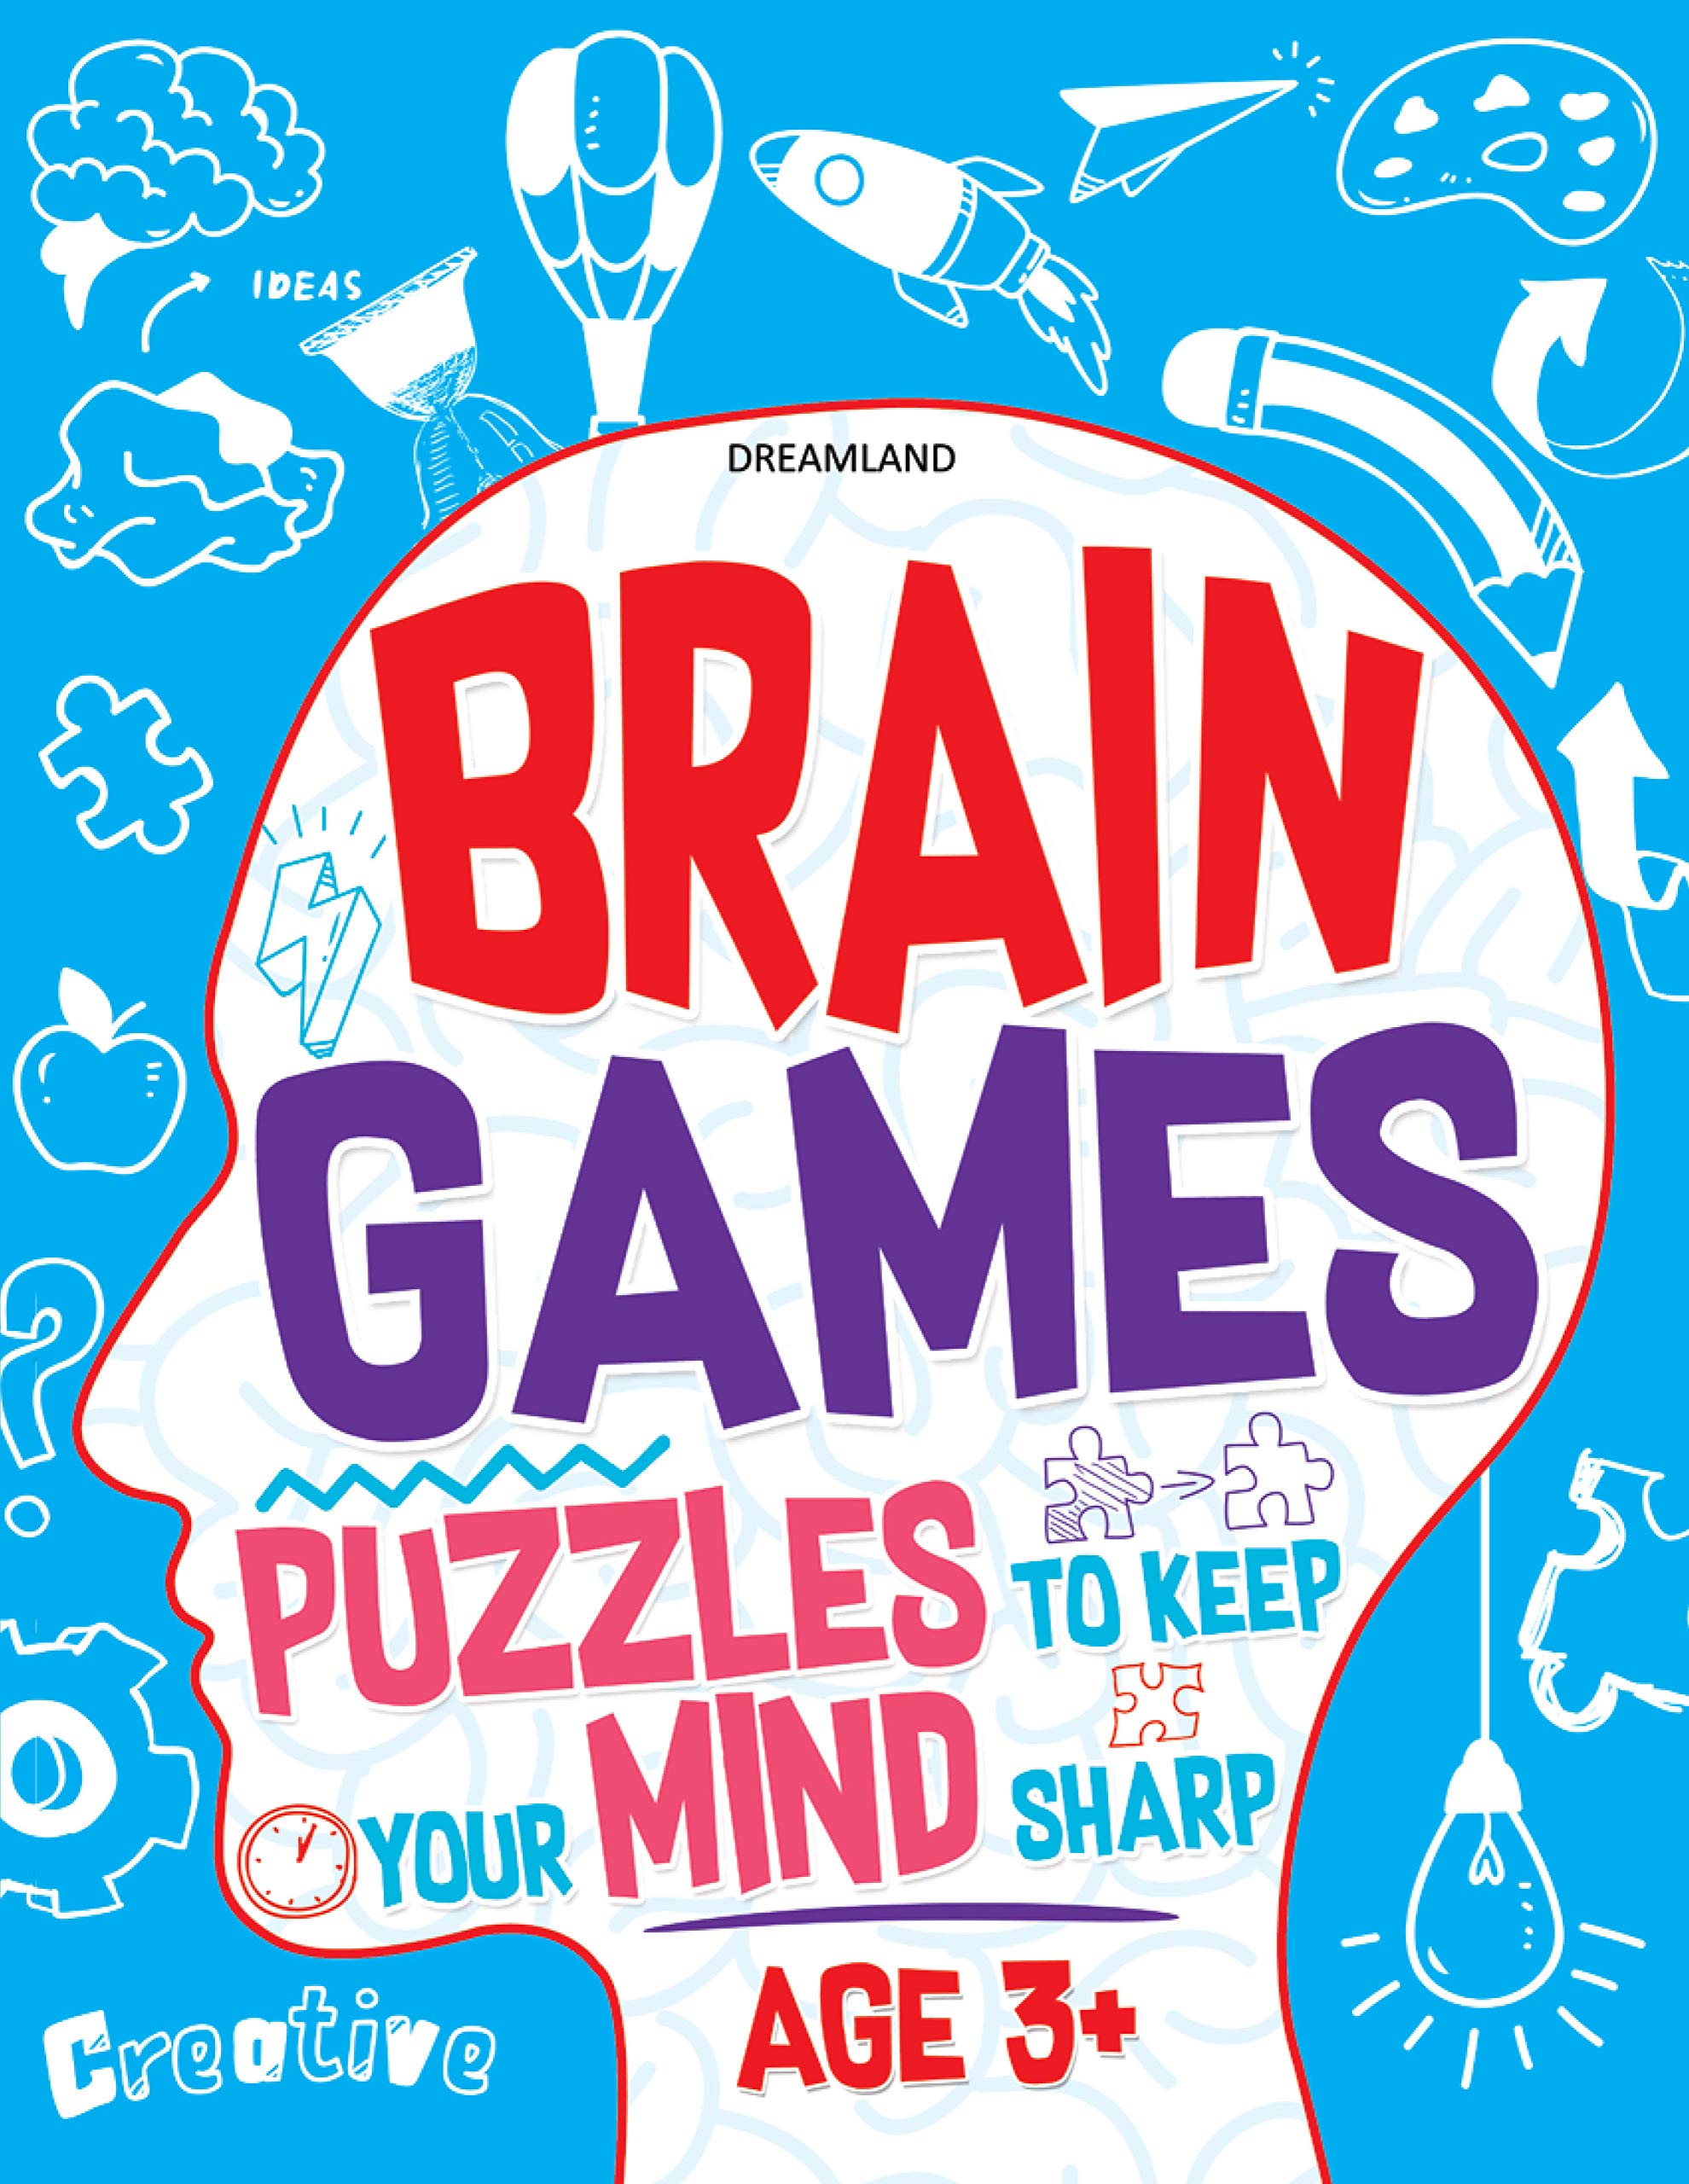 Brain Games (Puzzles to keep your Mind sharp Age 3+)